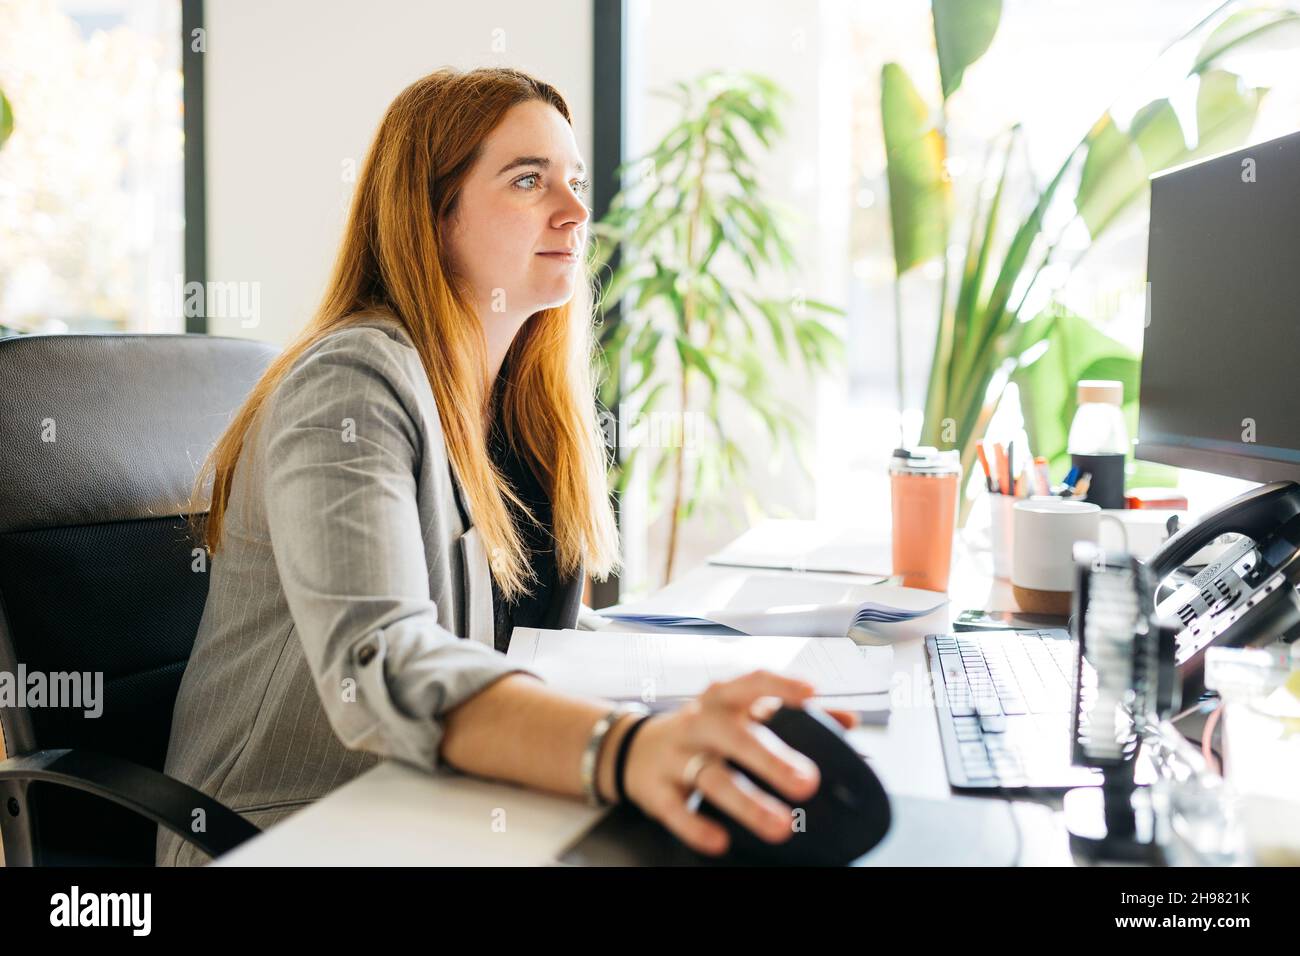 Young red haired woman, sitting on a desk and using a computer, in modern office Stock Photo